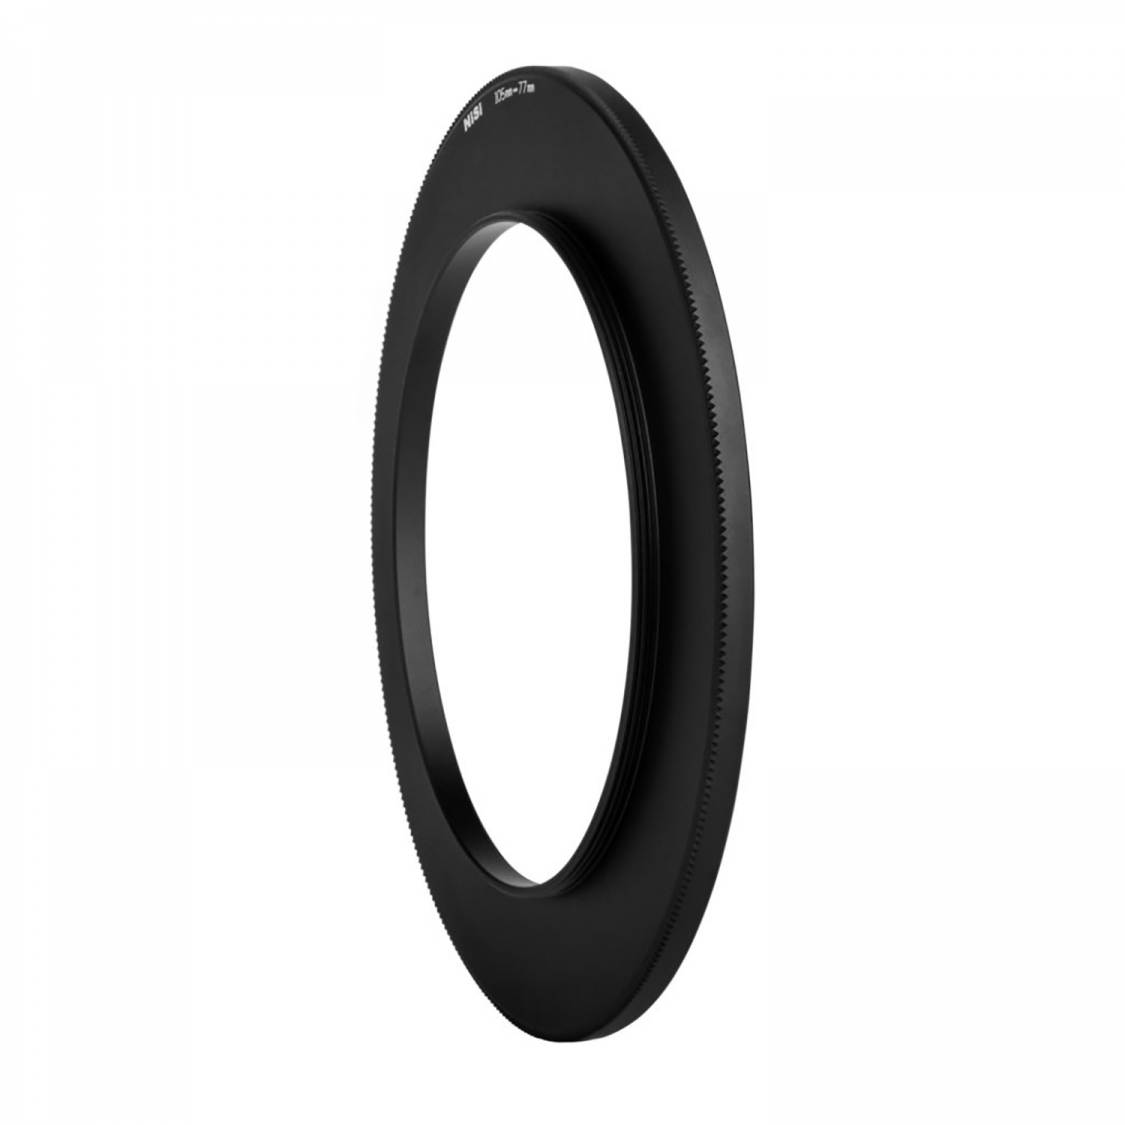 NiSi 82-105mm Adaptor for S5 for Standard Filter Threads